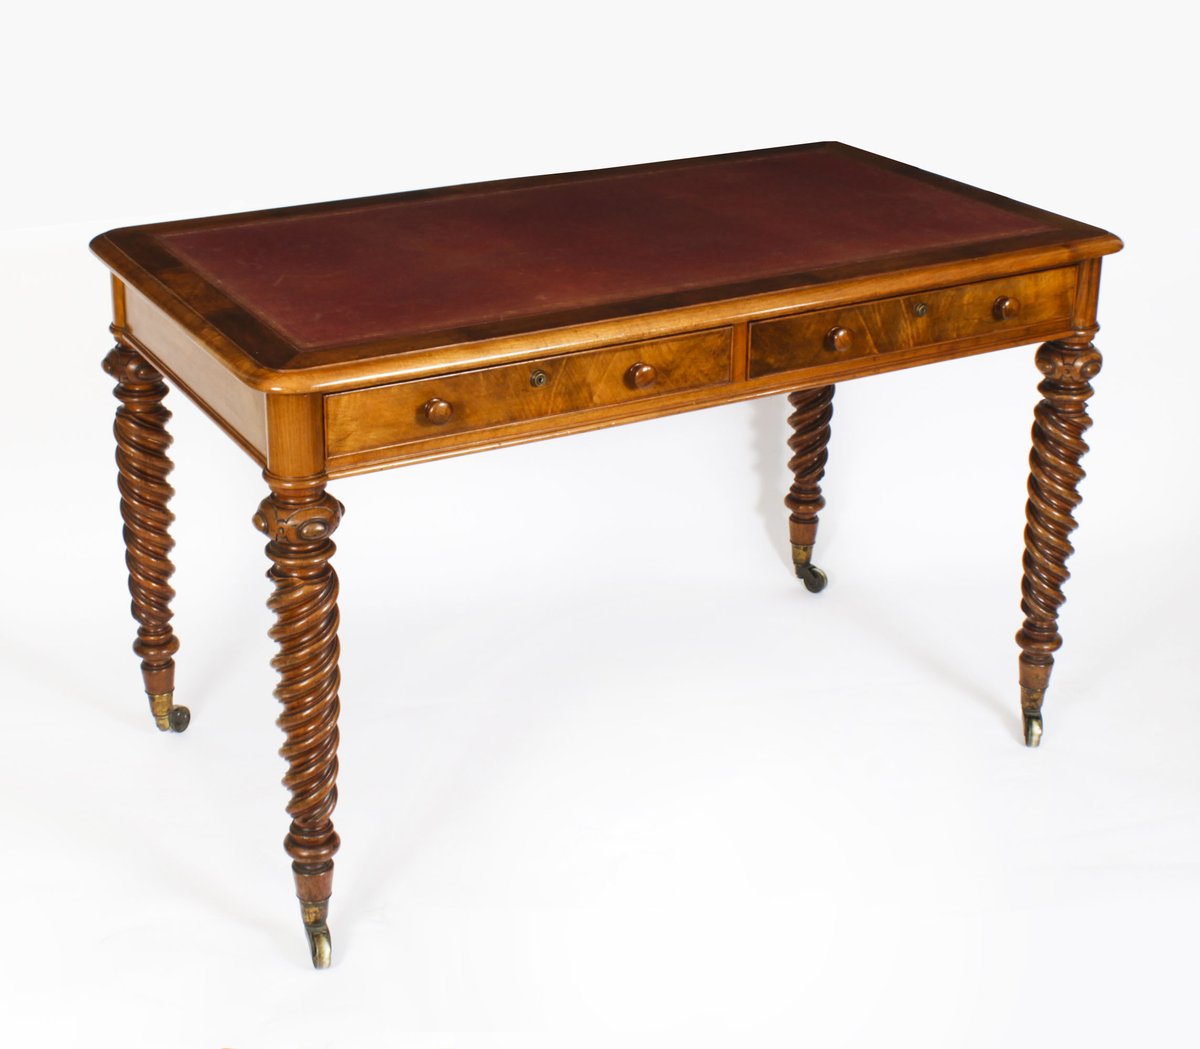 Uncover the magic of history with our Antique Hindley & Sons Writing Table Desk—a splendid piece from the Victorian era. 

regentantiques.com/itemDetails/A3…

#antiquedesks #antiquewritingtables #antiquefurniture #victorianelegance #victorianrevival #HindleyAndSons #elegantdesign